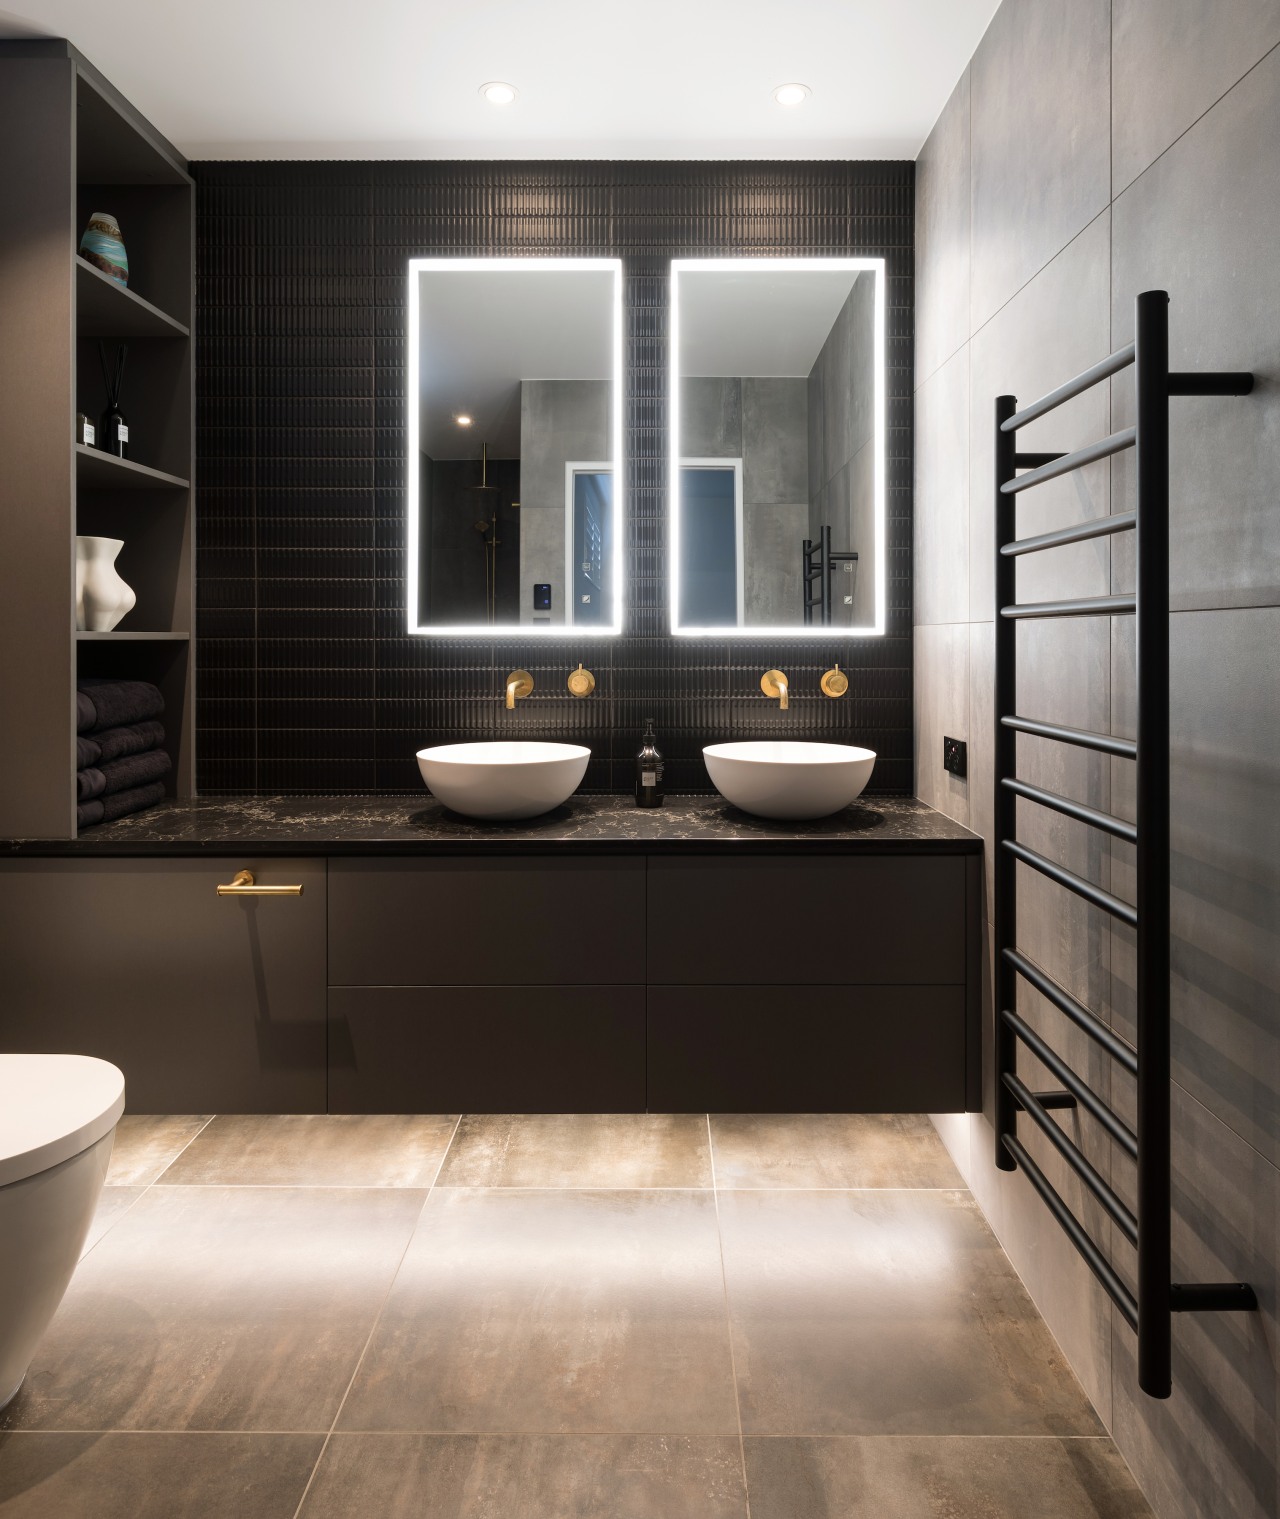 For this master bathroom, part of a master 